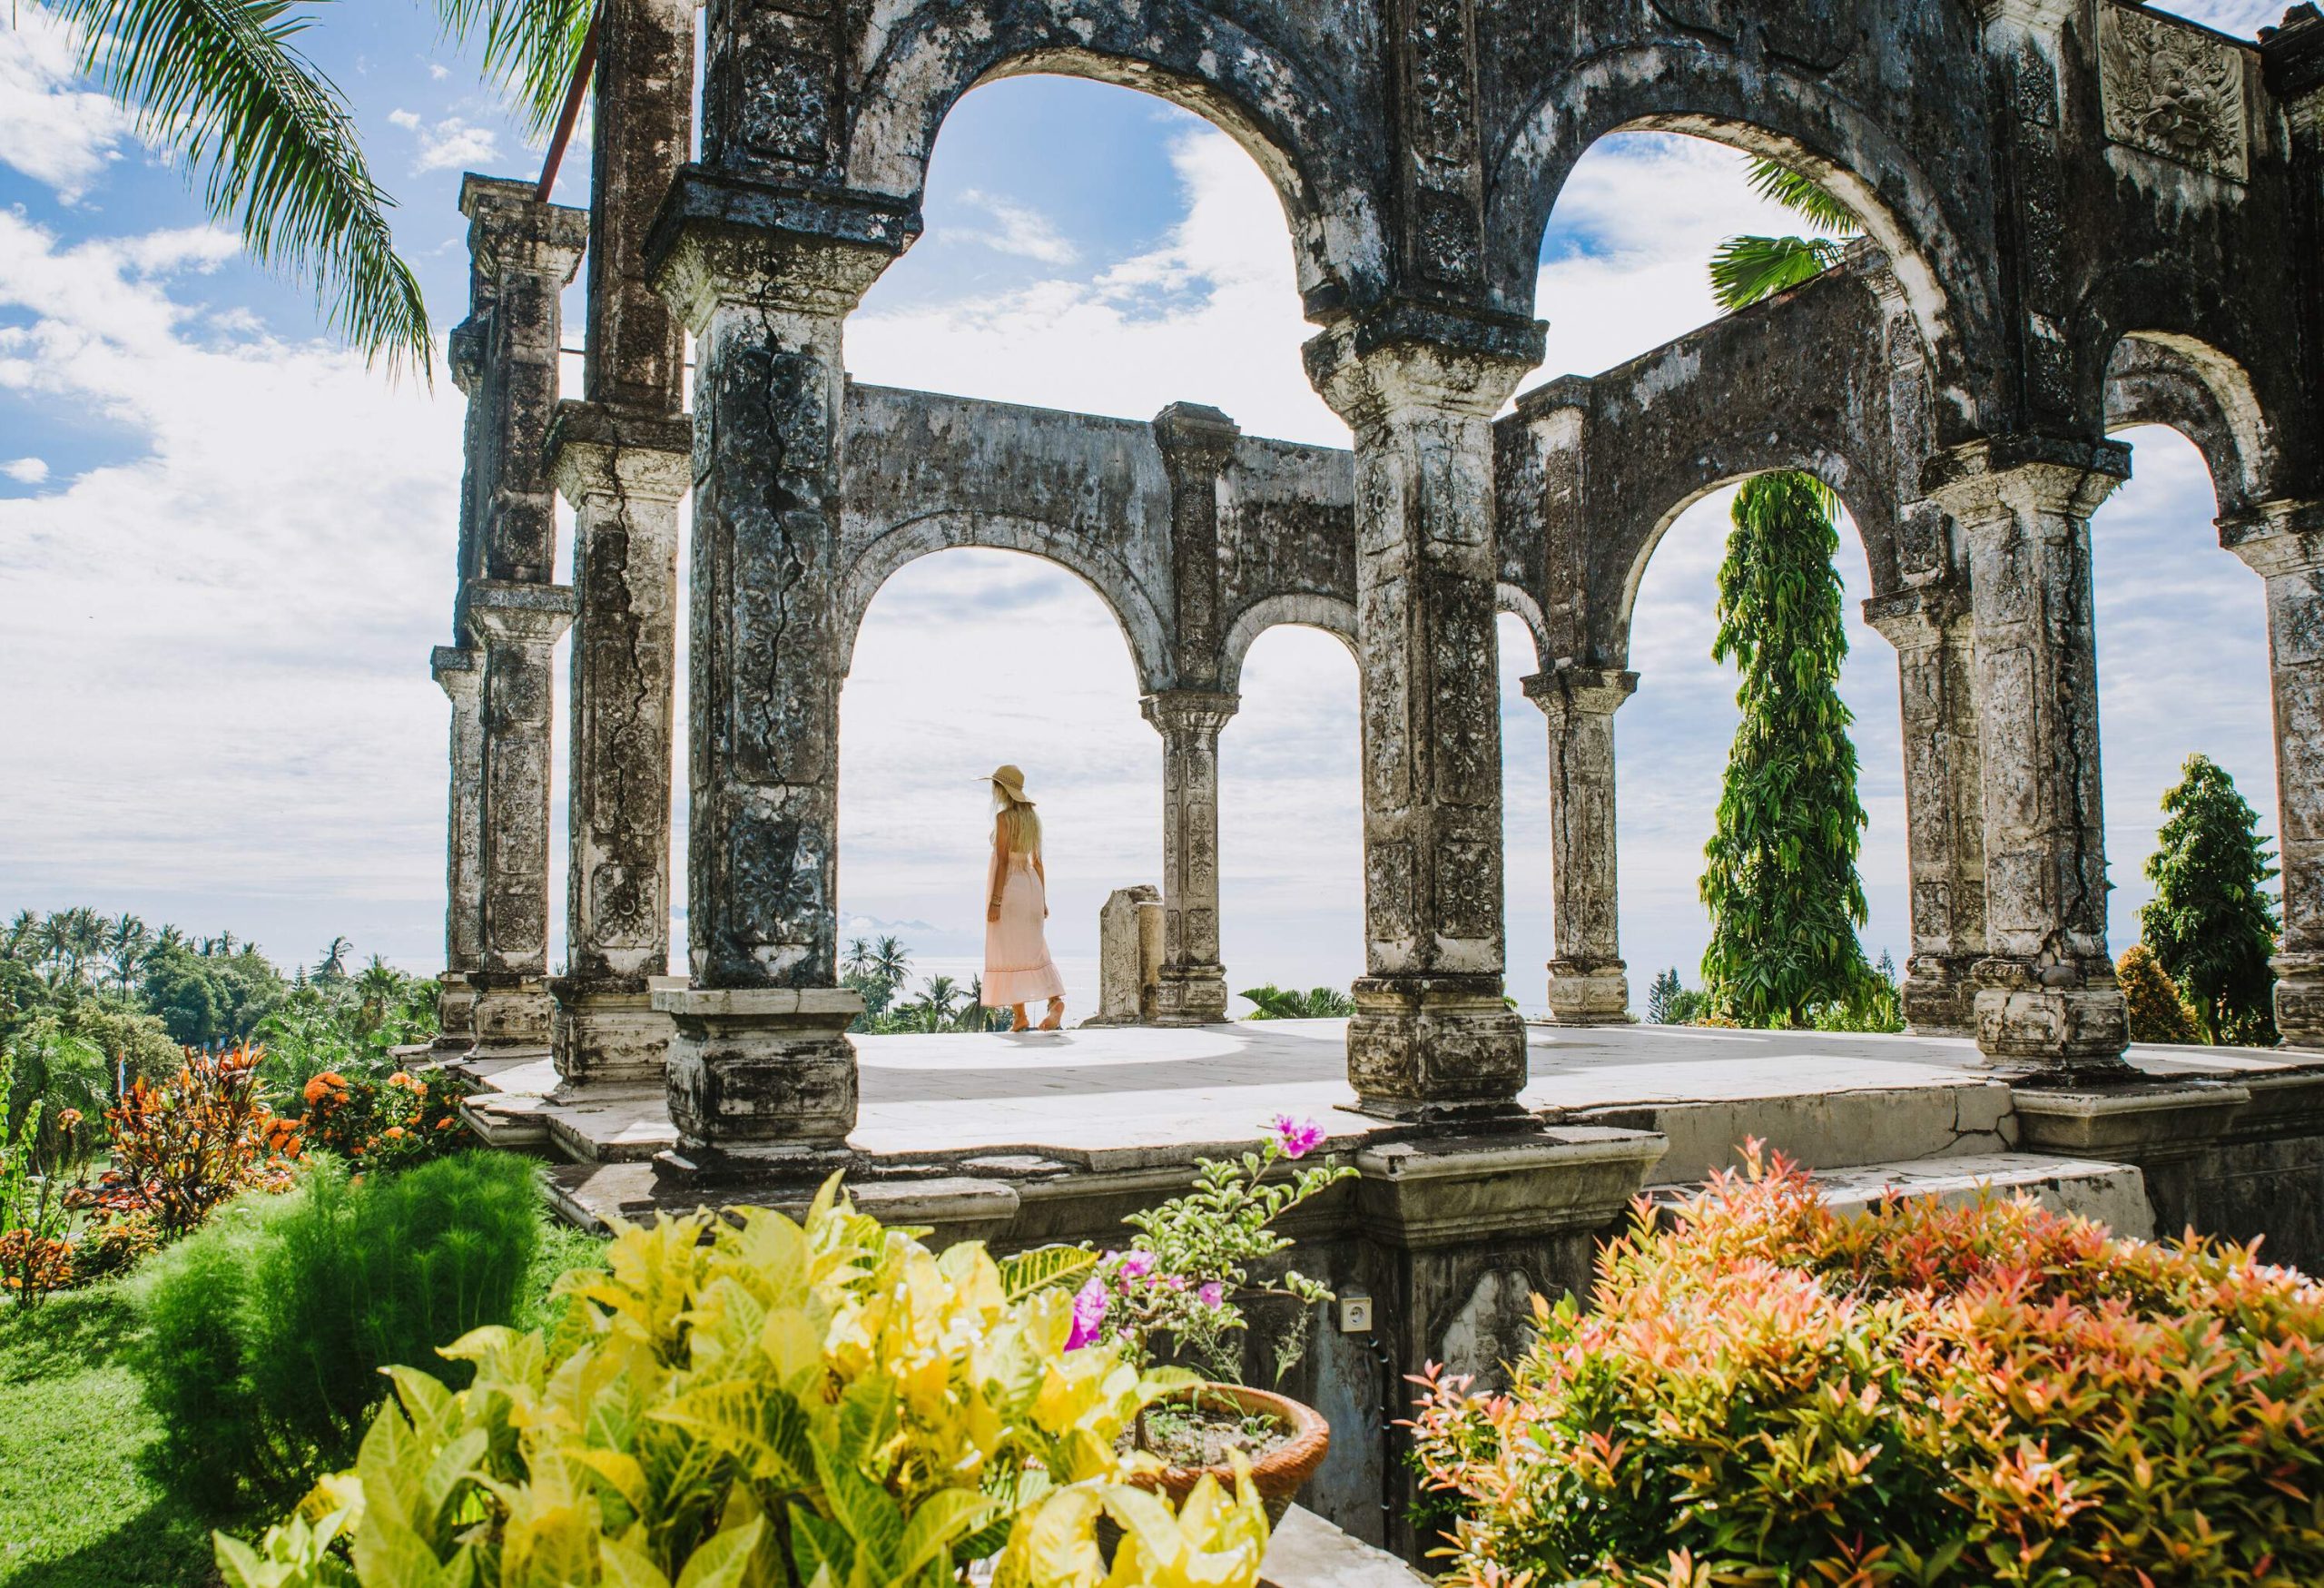 A woman stands in the middle of the ruins of a temple with an open roof and arched columns, surrounded by lush landscapes and colourful flowers.